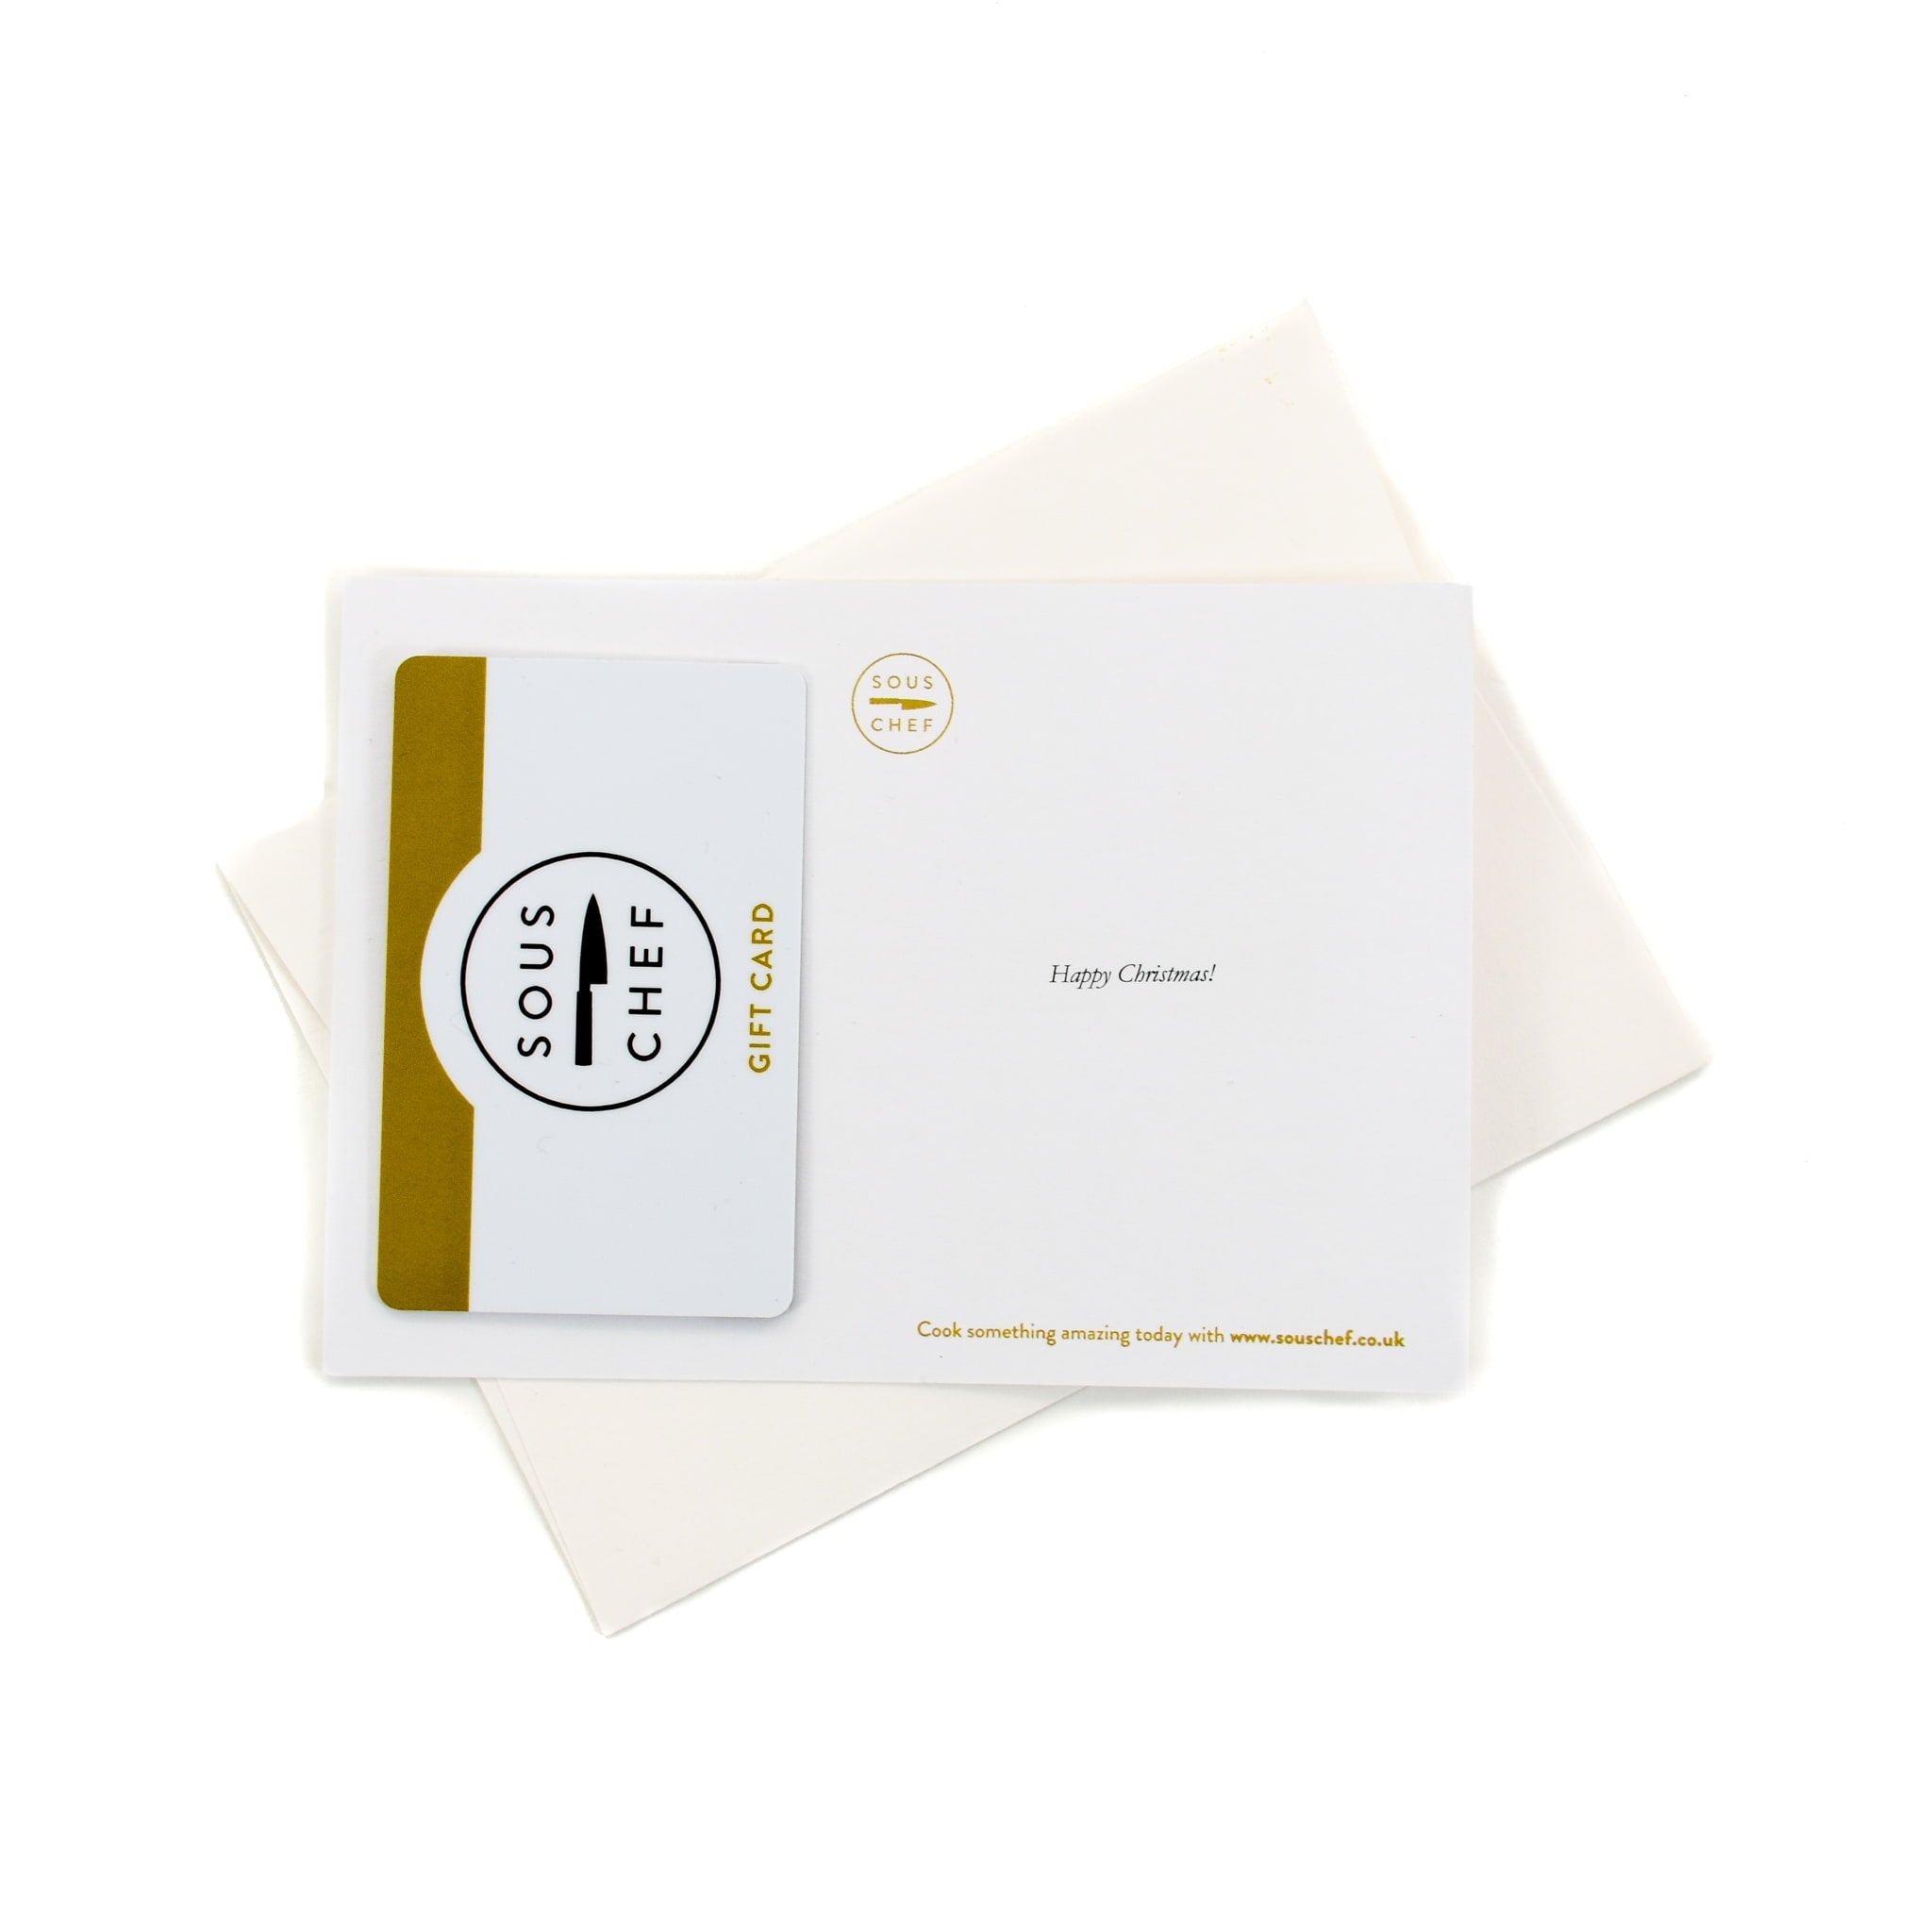 Sous Chef Physical Gift Card